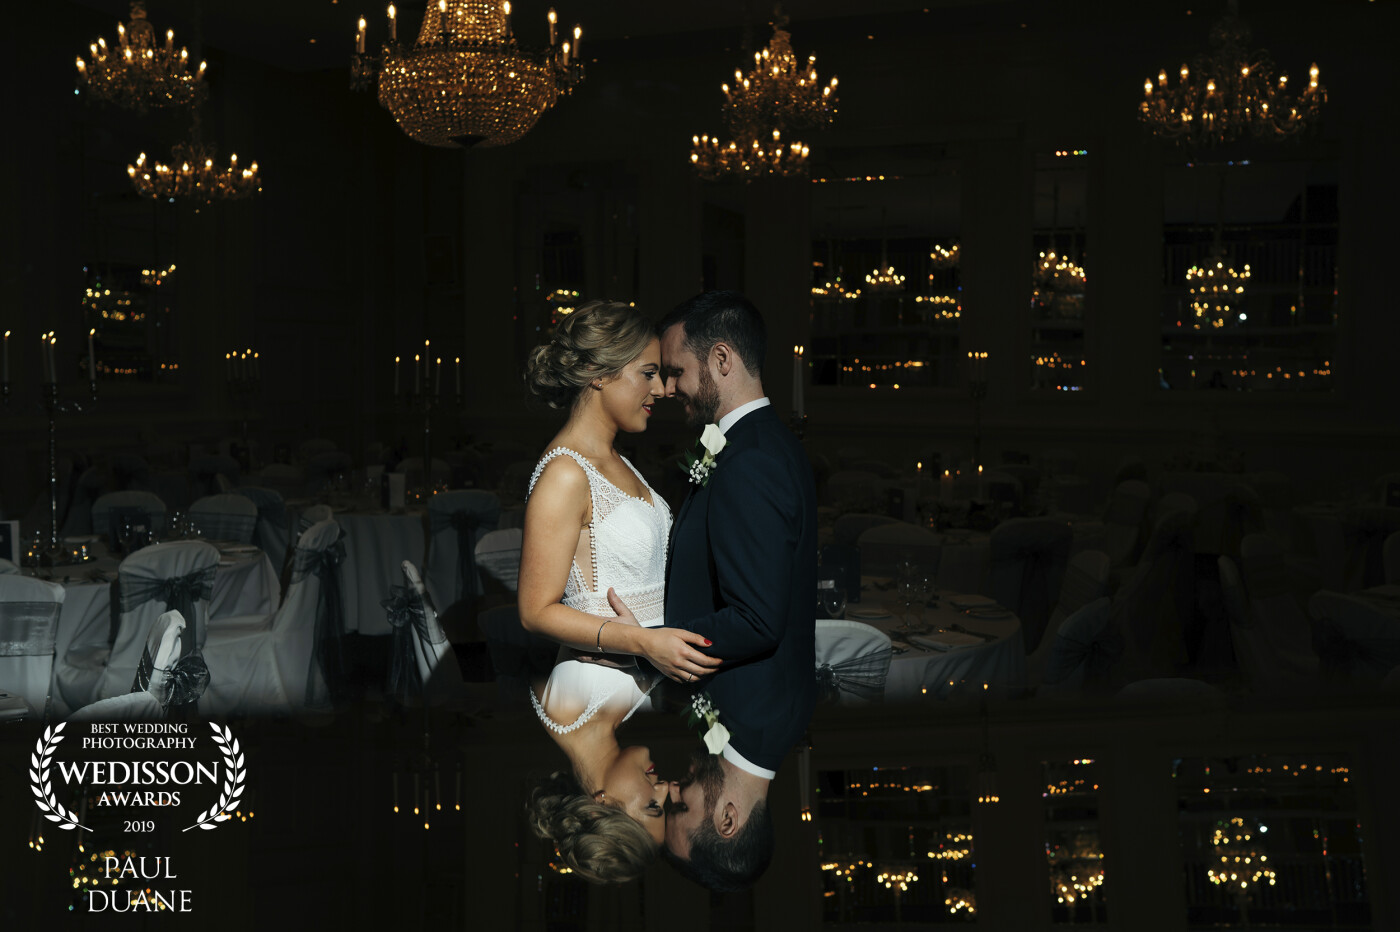 Reflections:  Absolutely loved creating this shot. Captured at a beautiful boutique hotel in Galway, Ireland. <br />
<br />
The chandeliers and fairy lights just make it so romantic looking. 